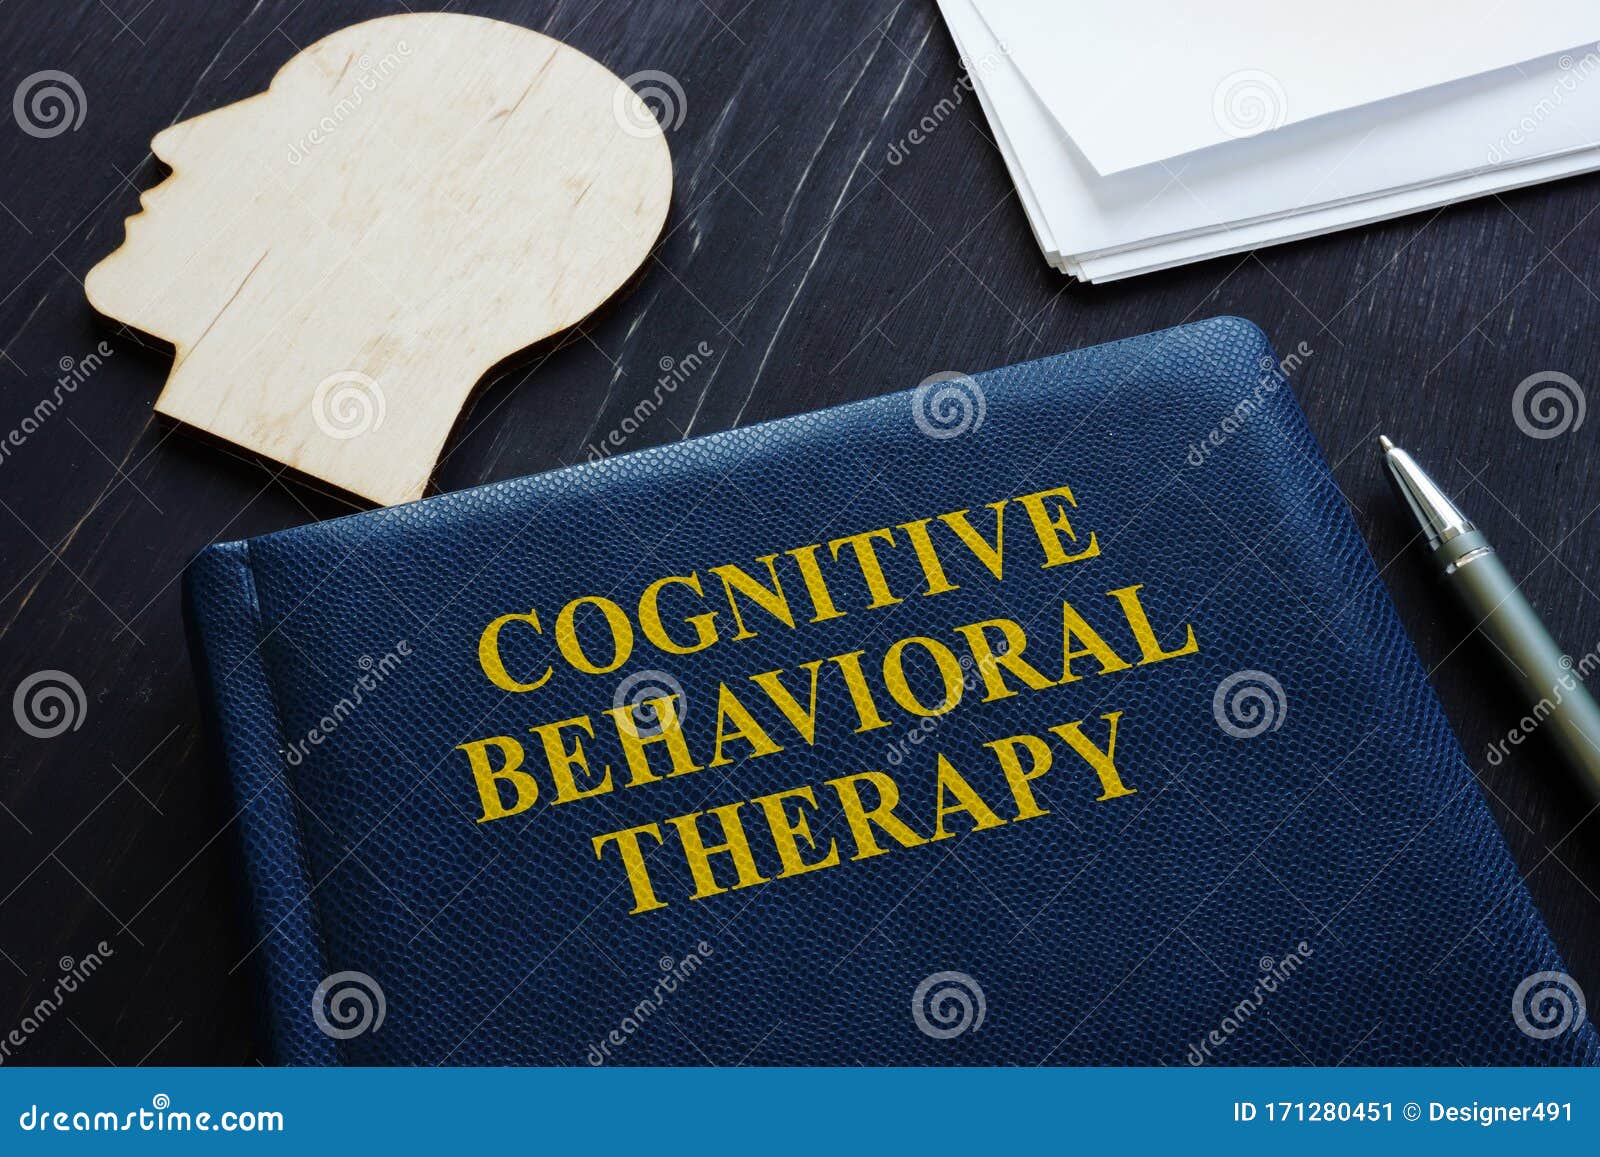 cognitive behavioral therapy cbt book and head 